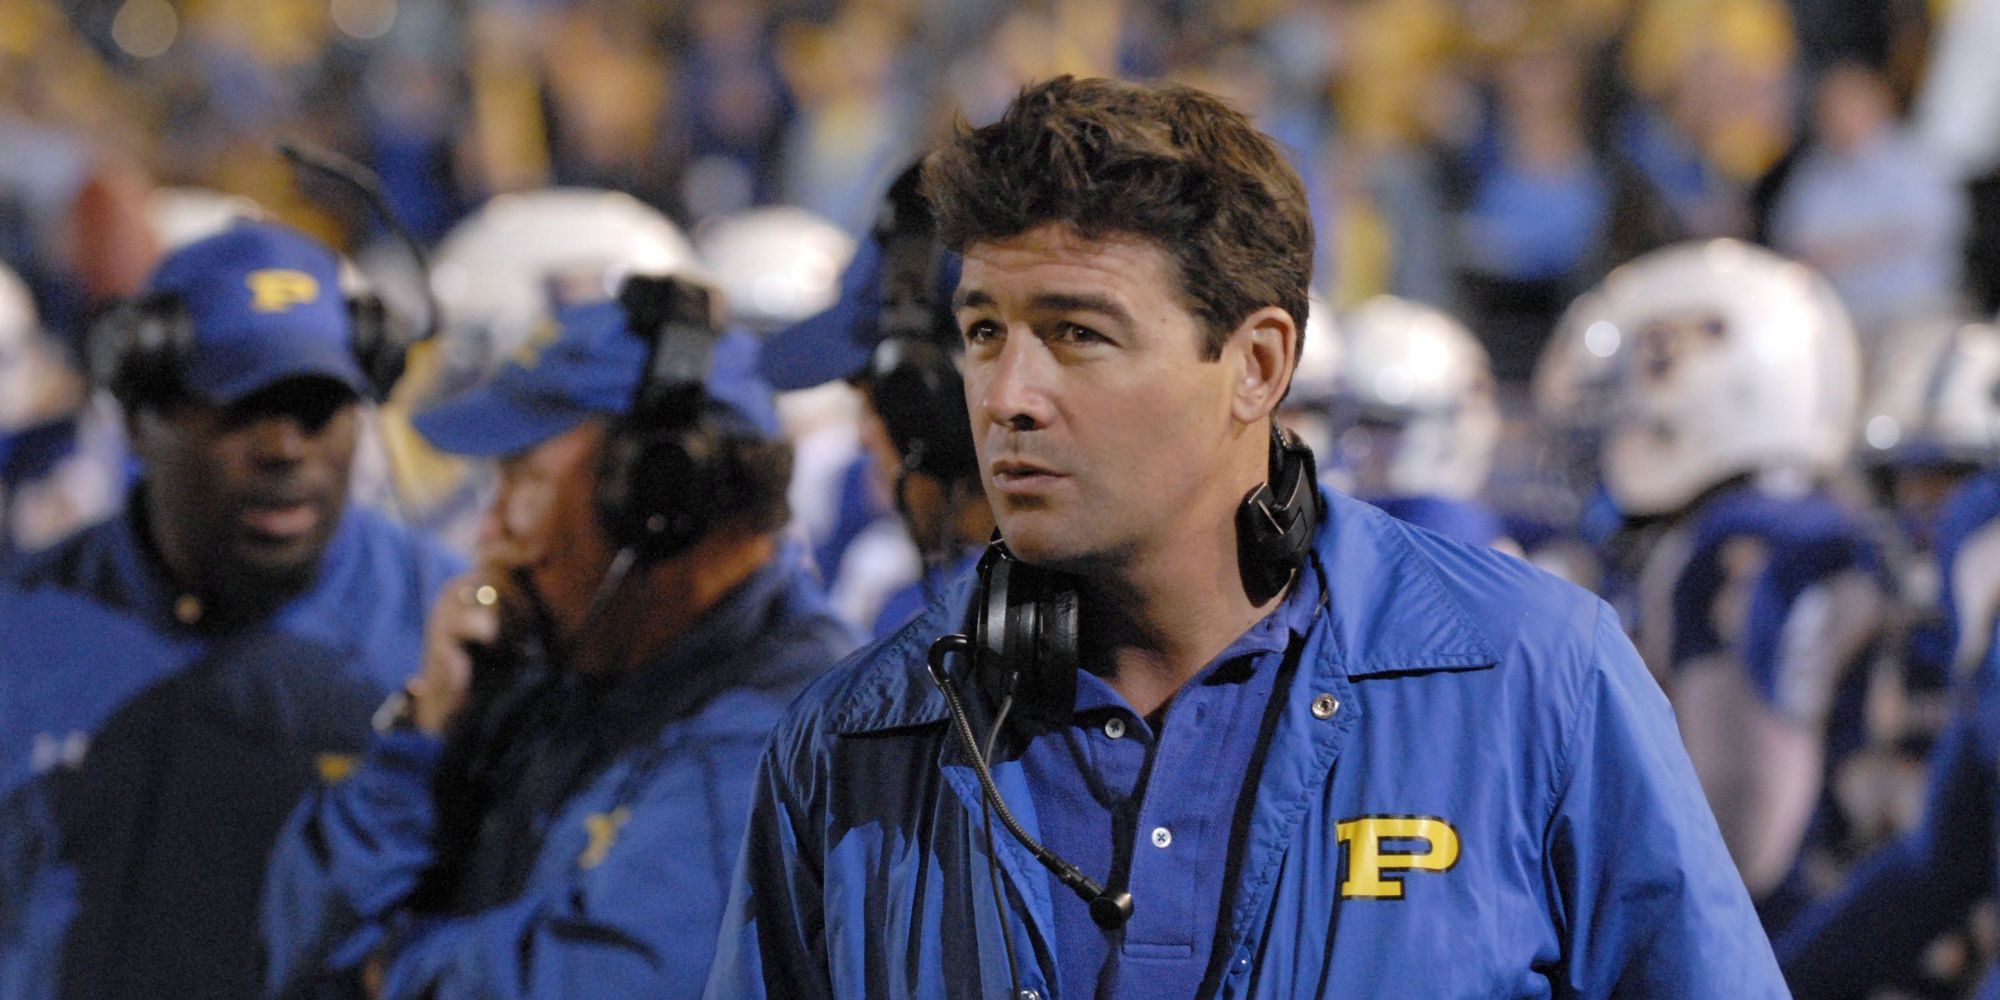 Kyle Chandler coaching a football game in Friday Night Lights